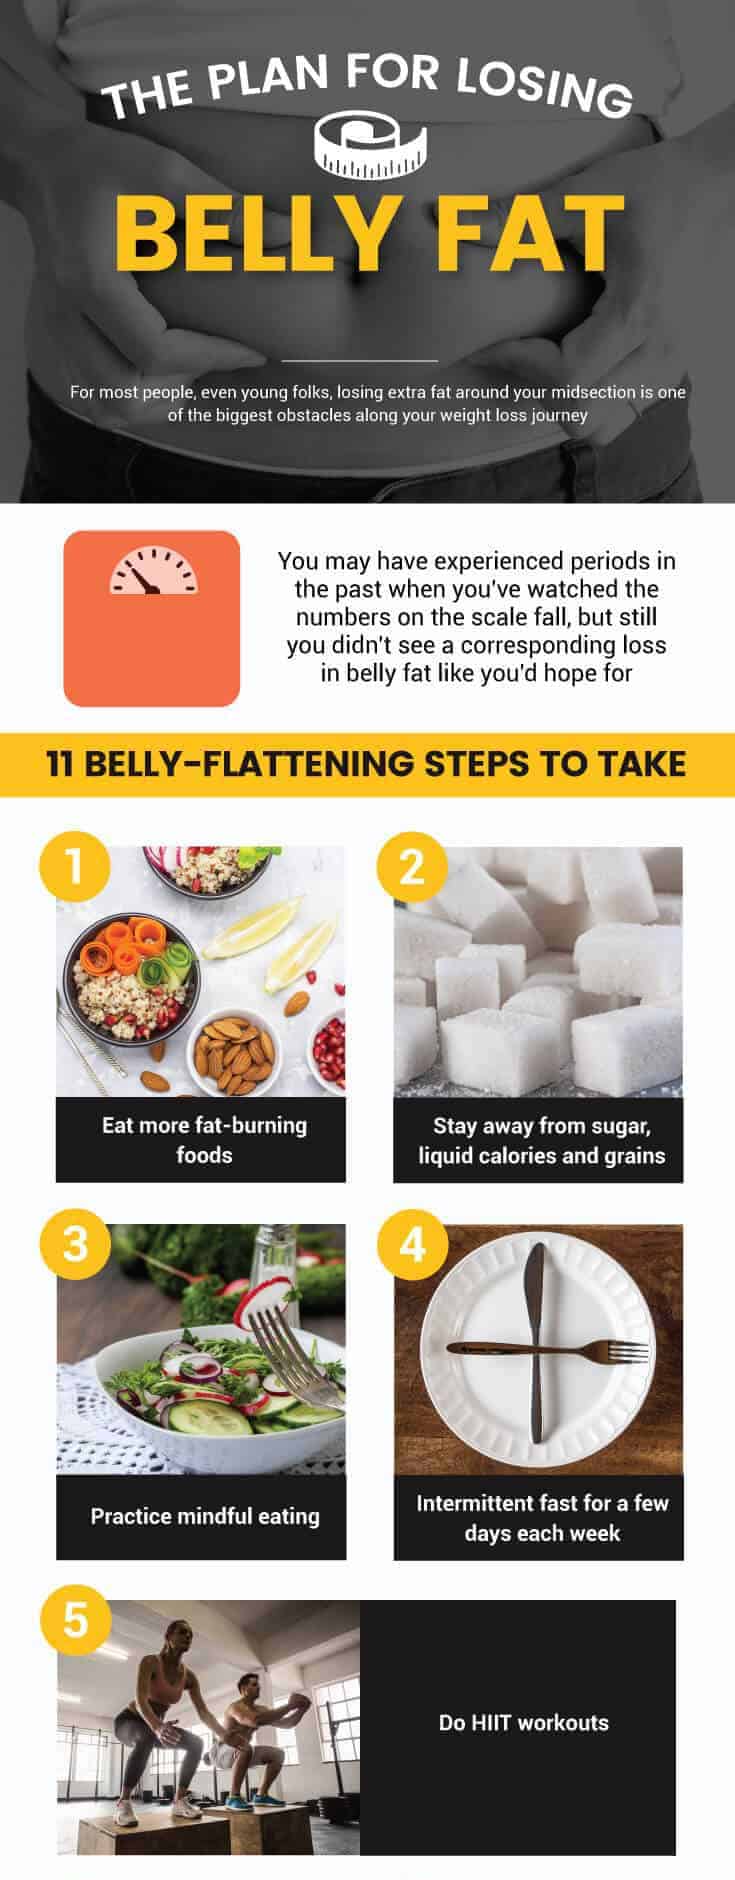 How to lose belly fat - Dr. Axe